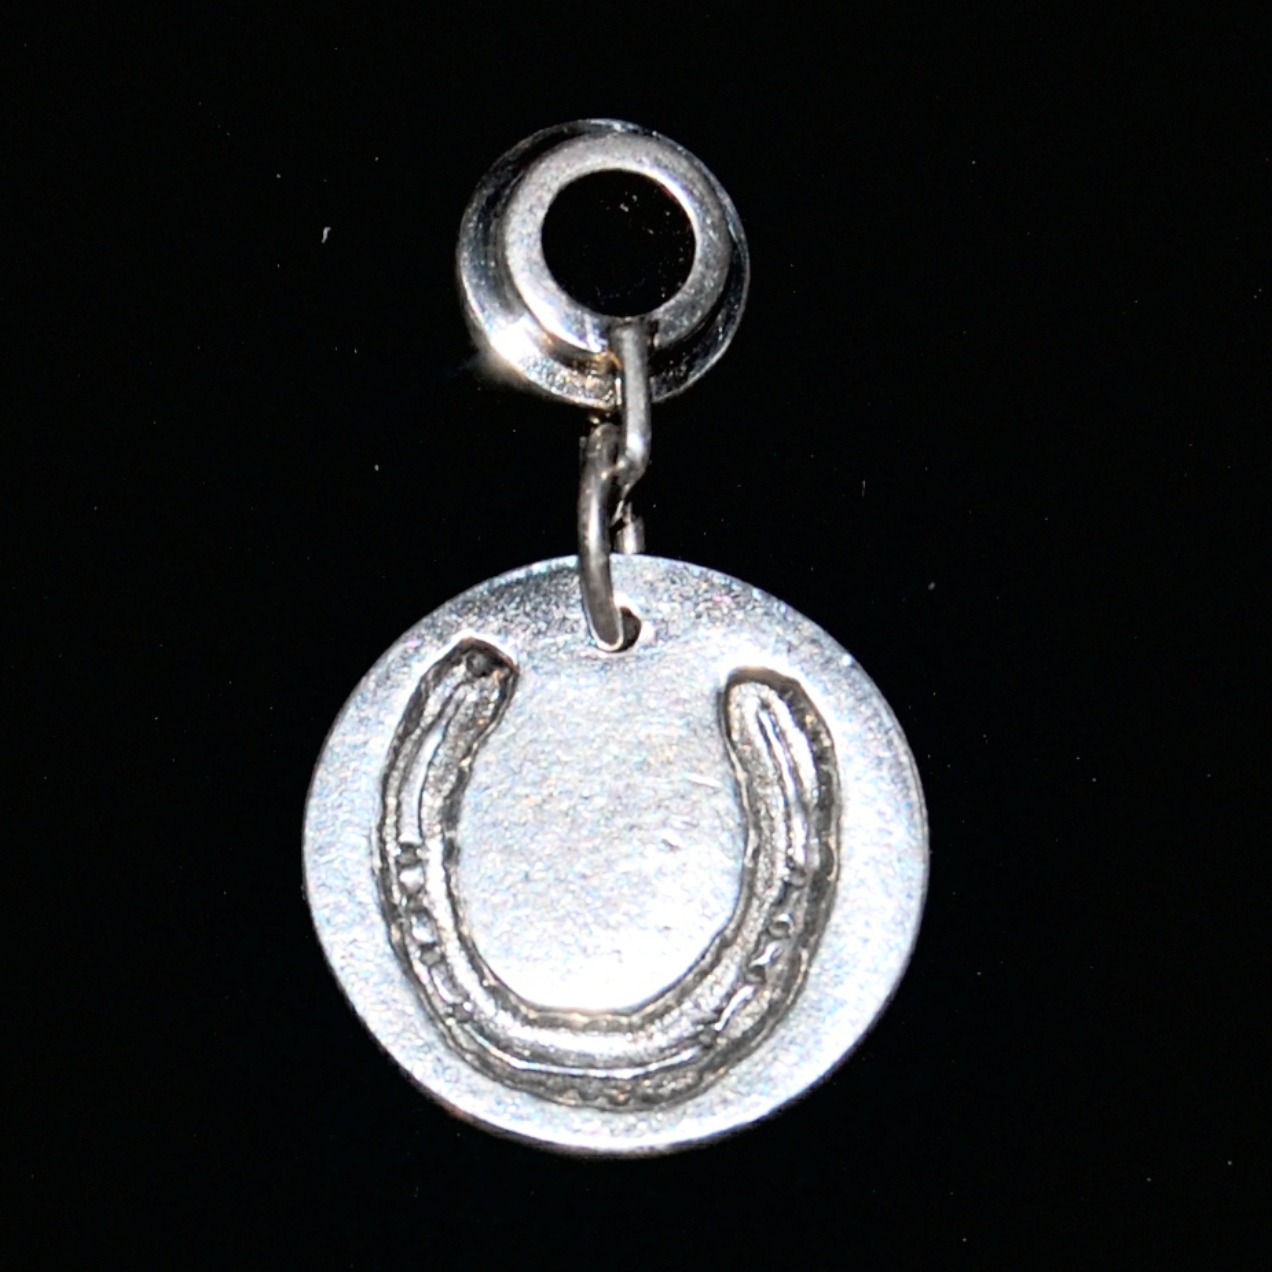 Regular silver circle charm with horse shoe imprint. Presented on a charm carrier ready to add to a bracelet.